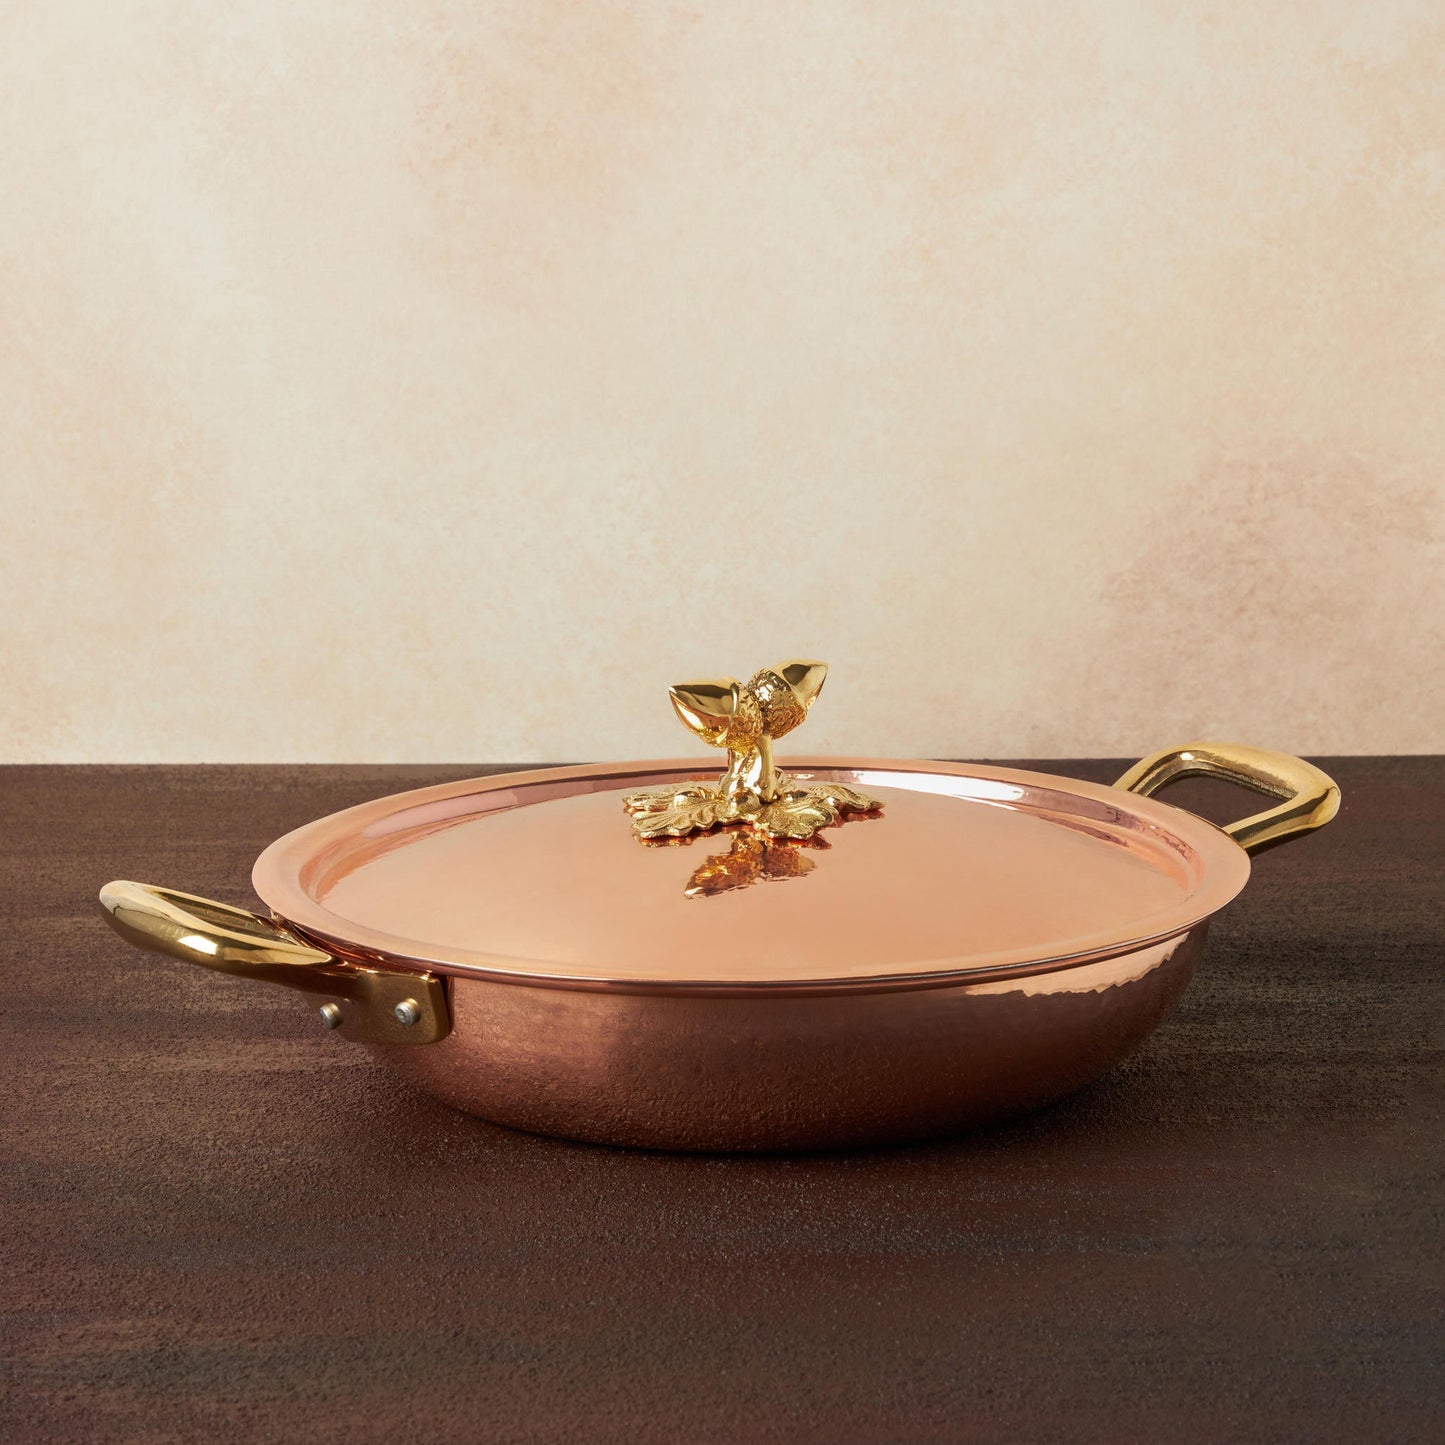 Hammered copper 11" Double Handle Fry Pan lined with high purity tin applied by hand over fire and bronze handles, from Ruffoni Historia collection